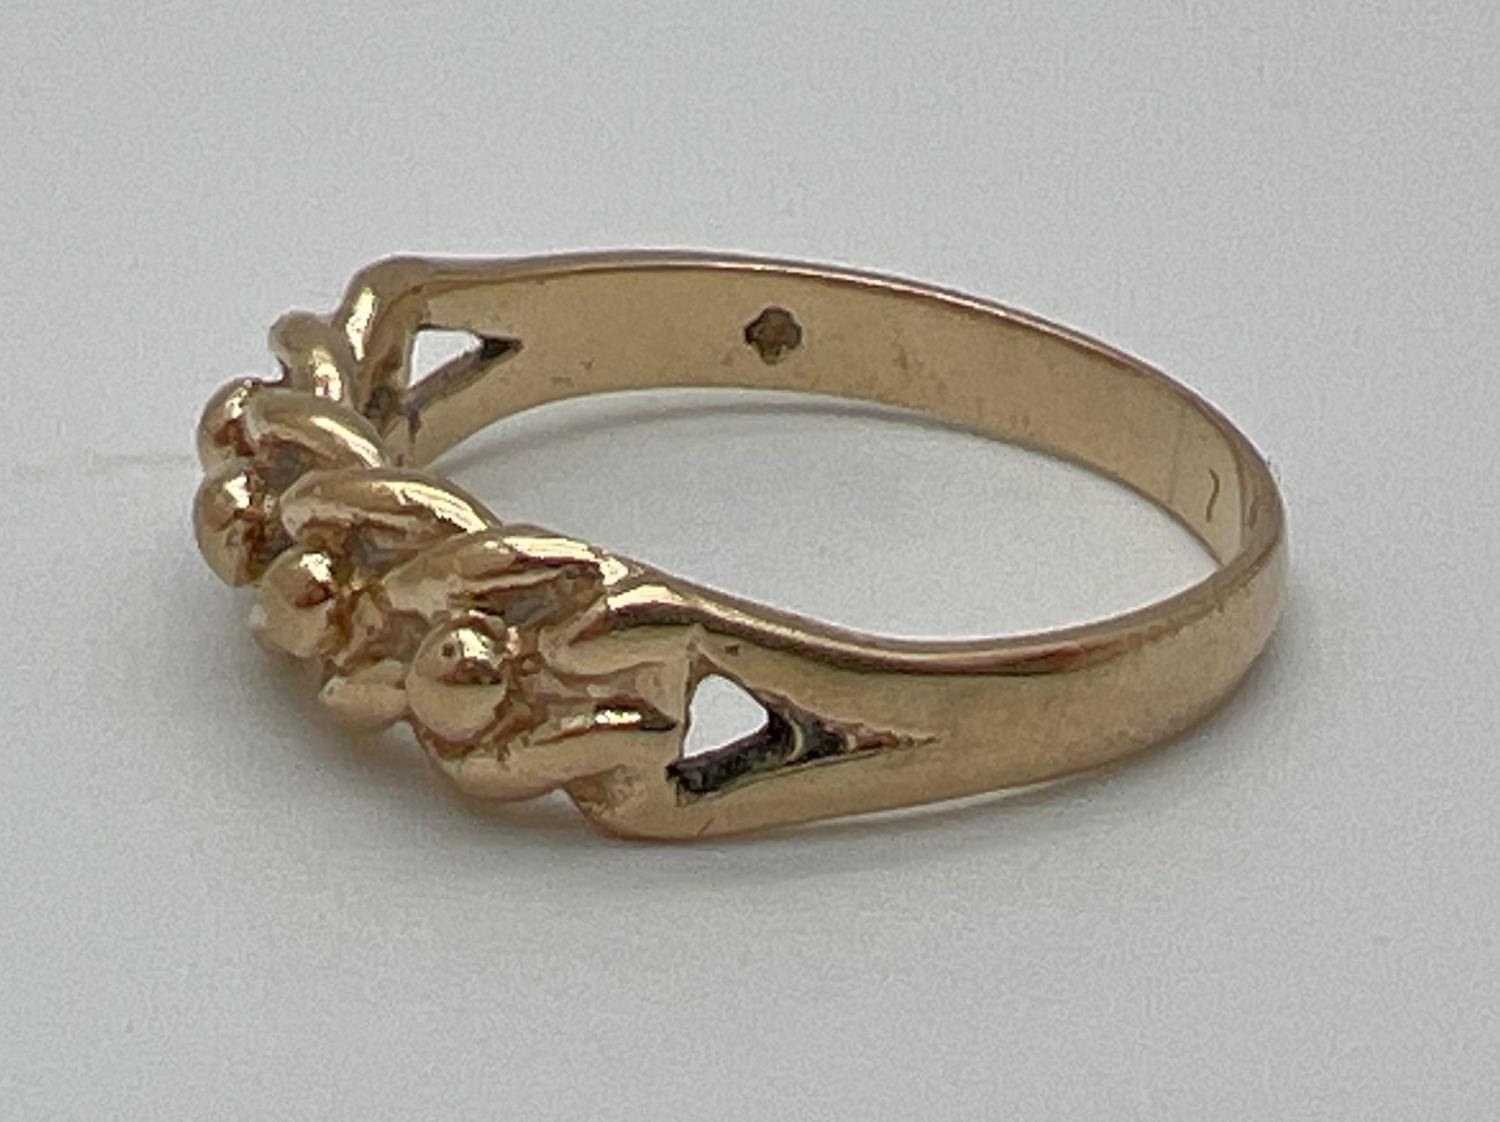 A vintage 9ct gold single row Keeper ring, fully hallmarked inside band. Ring size N. Total weight - Image 3 of 3